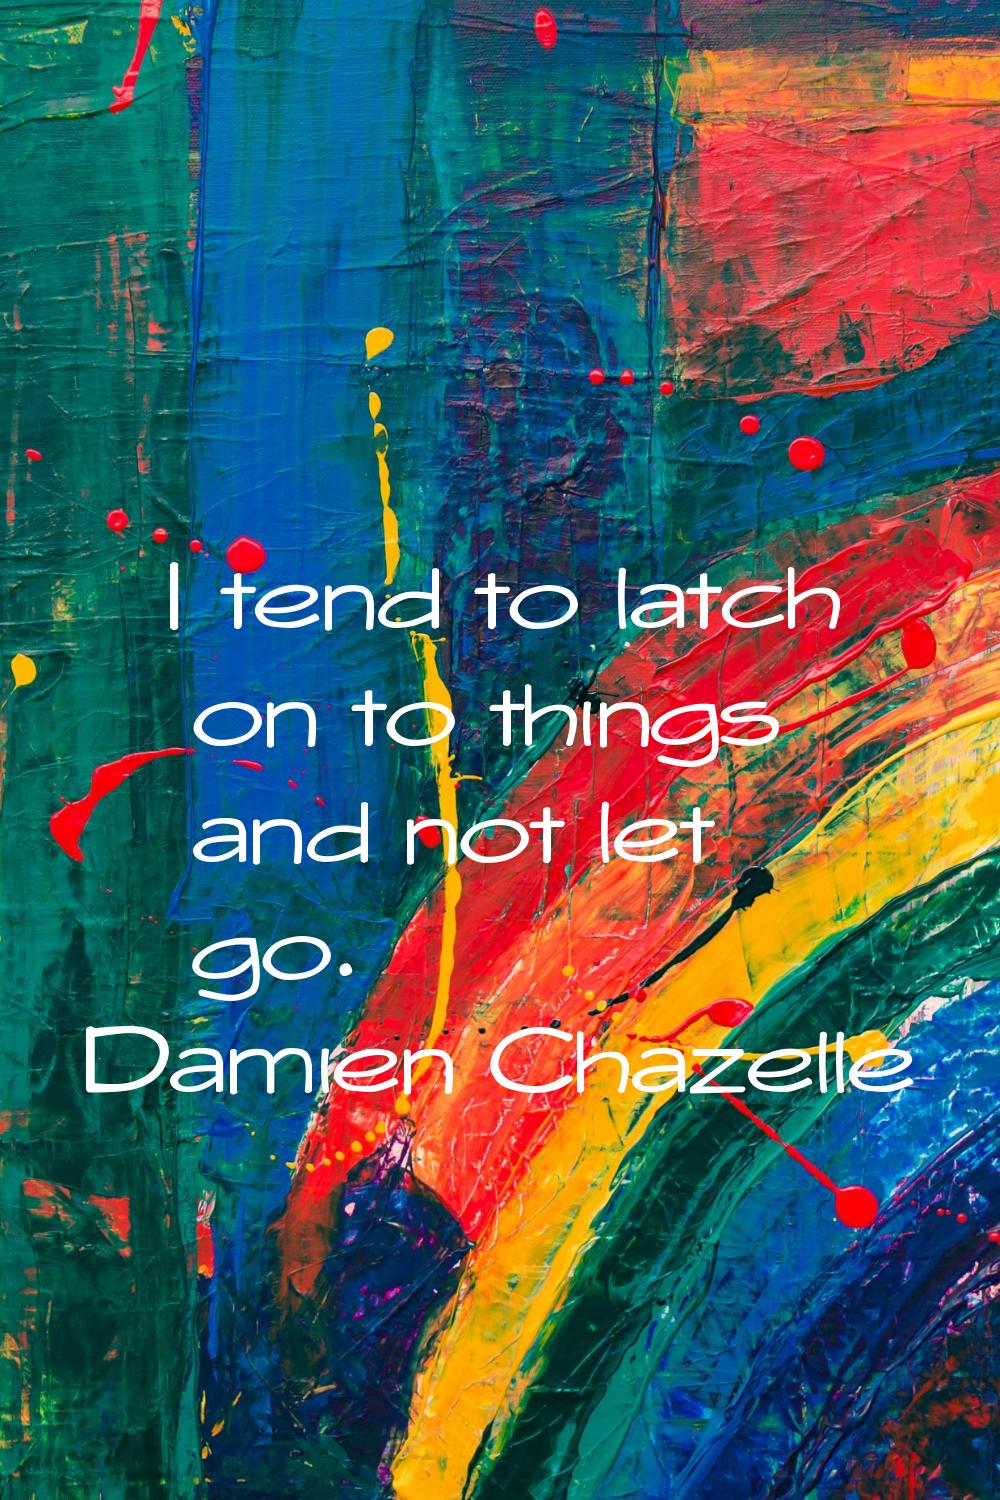 I tend to latch on to things and not let go.